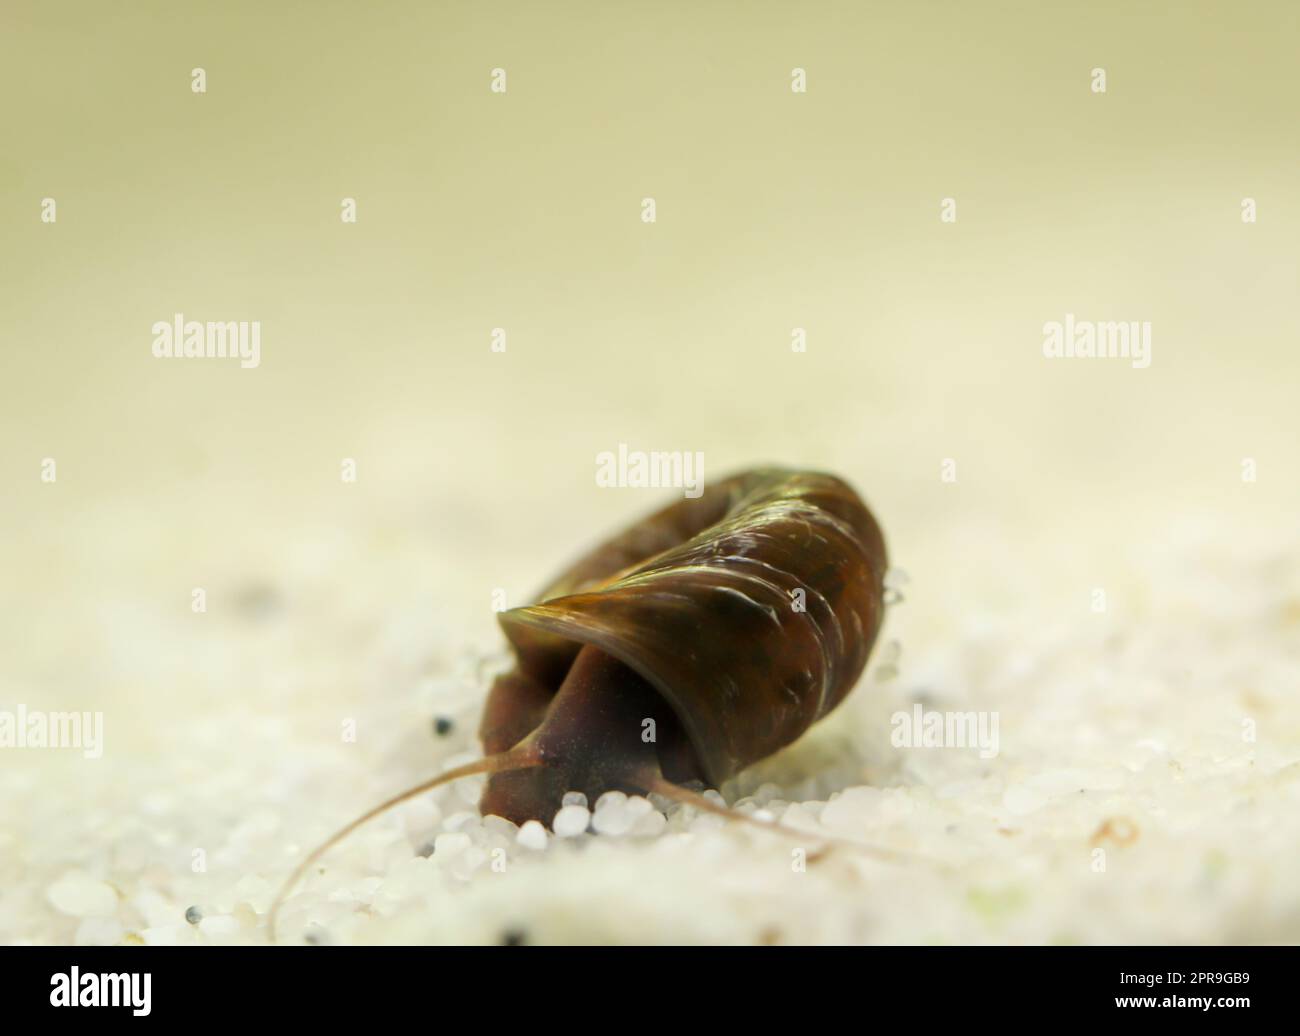 A post horn snail in the aquarium. Its shell is shaped like a post horn. Stock Photo